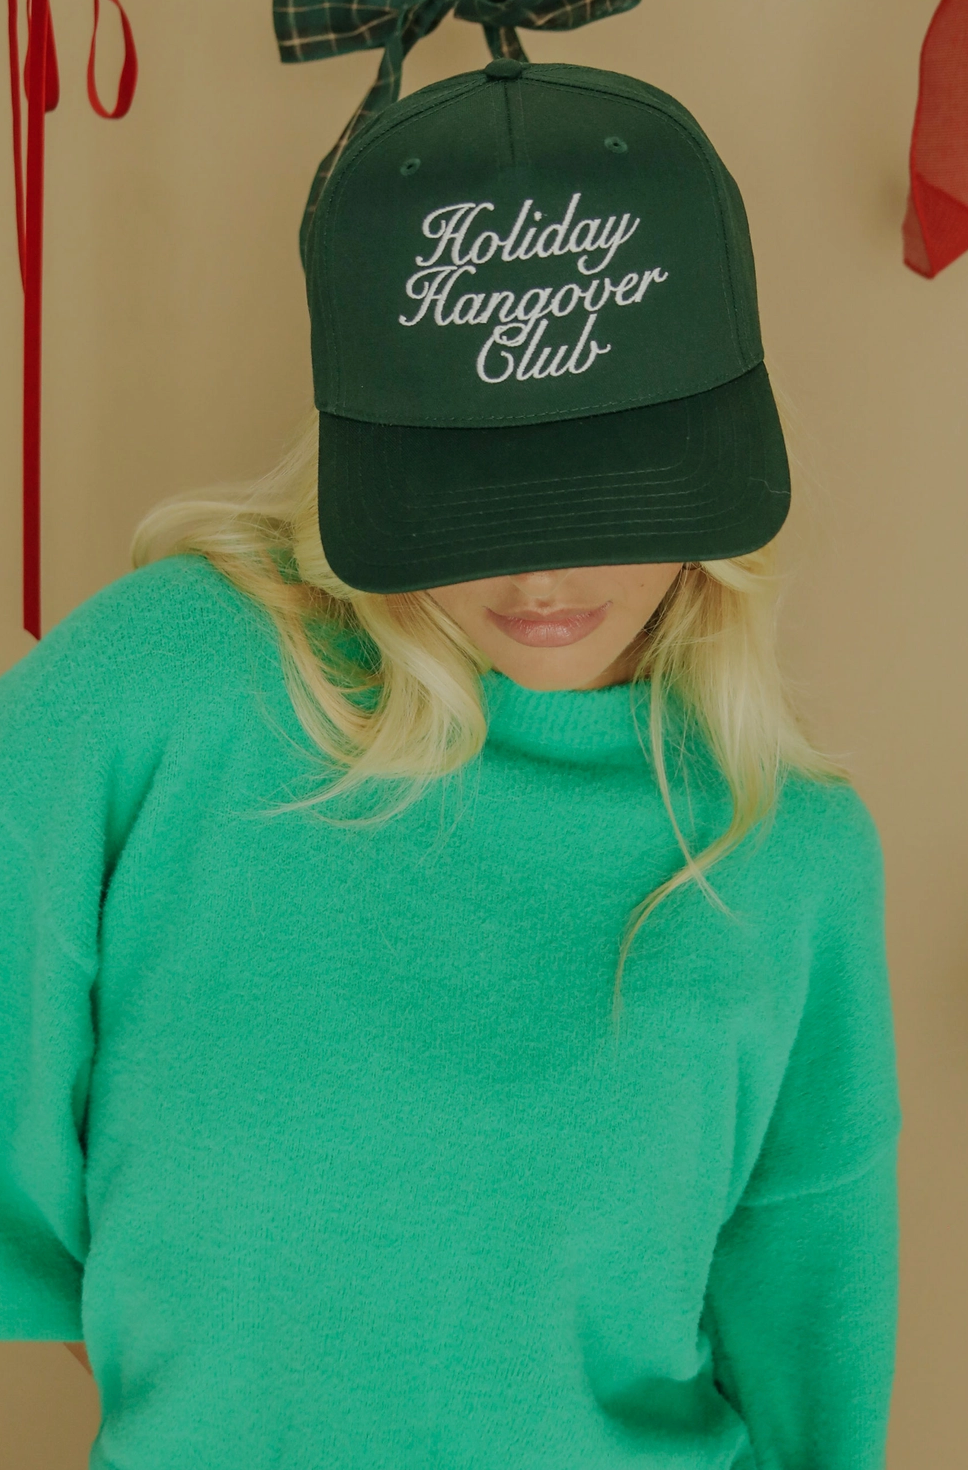 holiday hangover club trucker hat